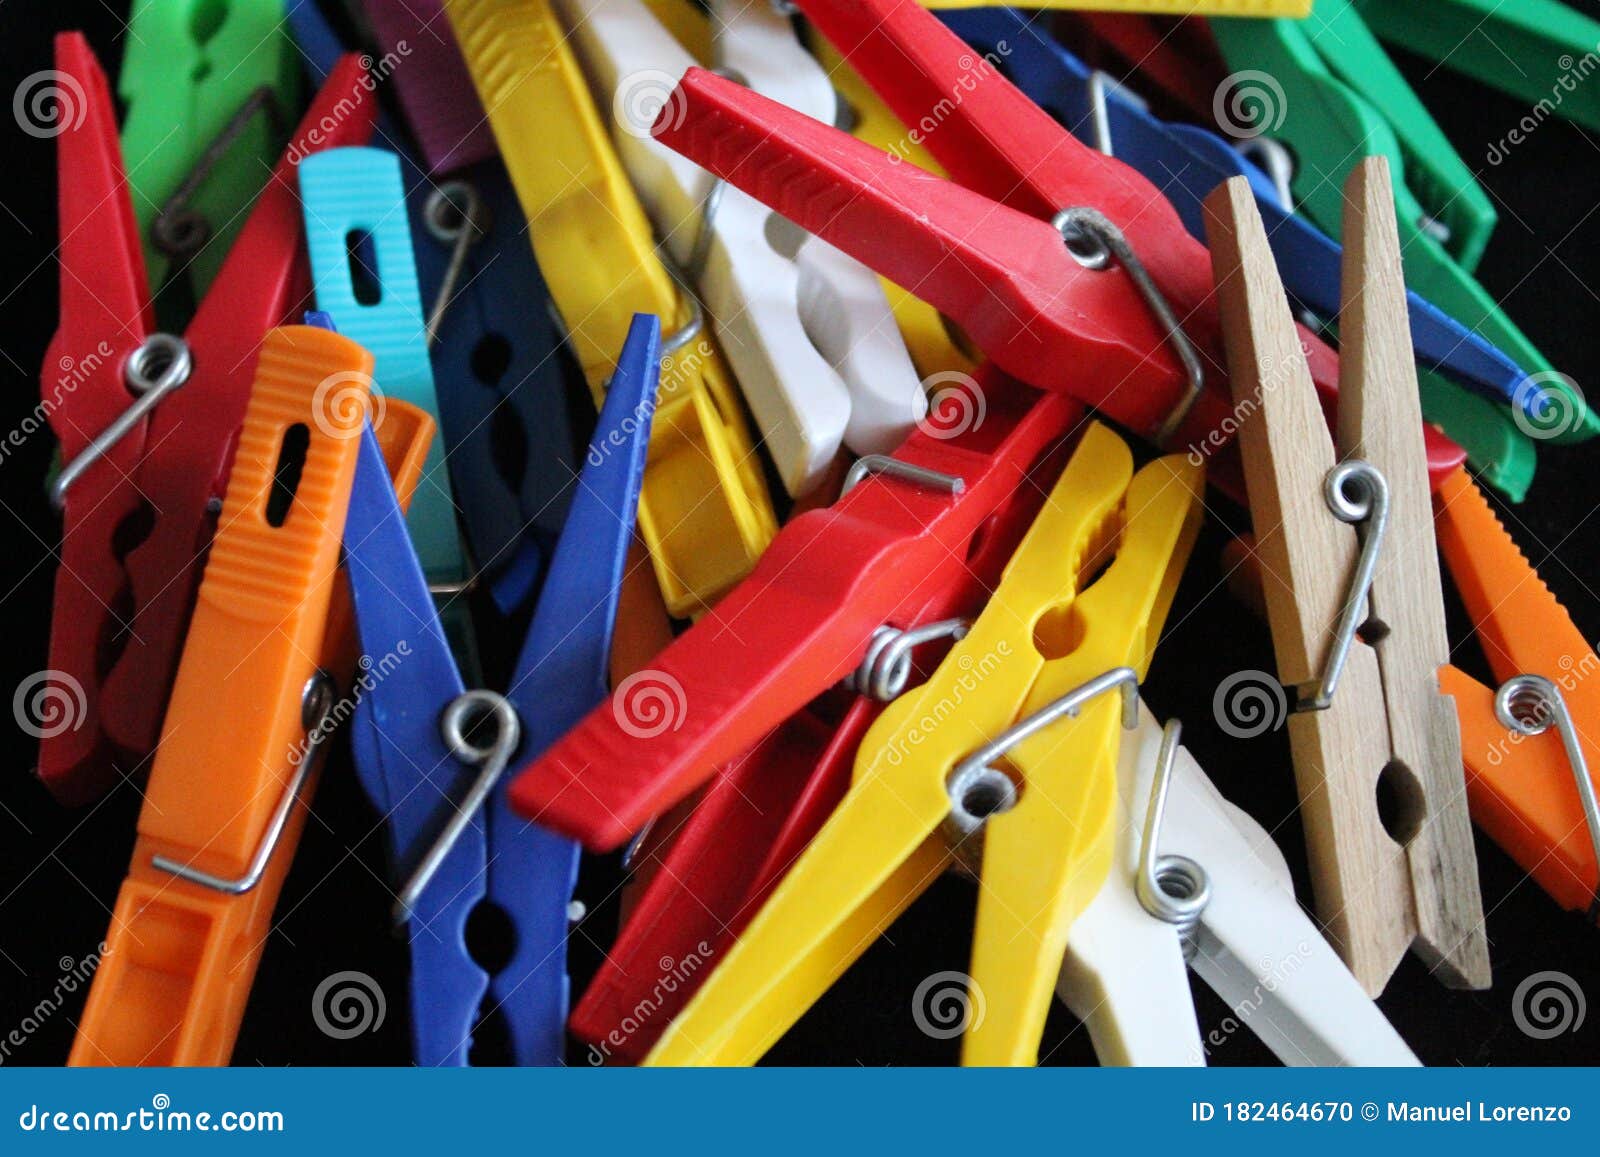 plastic tweezers clothes colors hold dry red blue